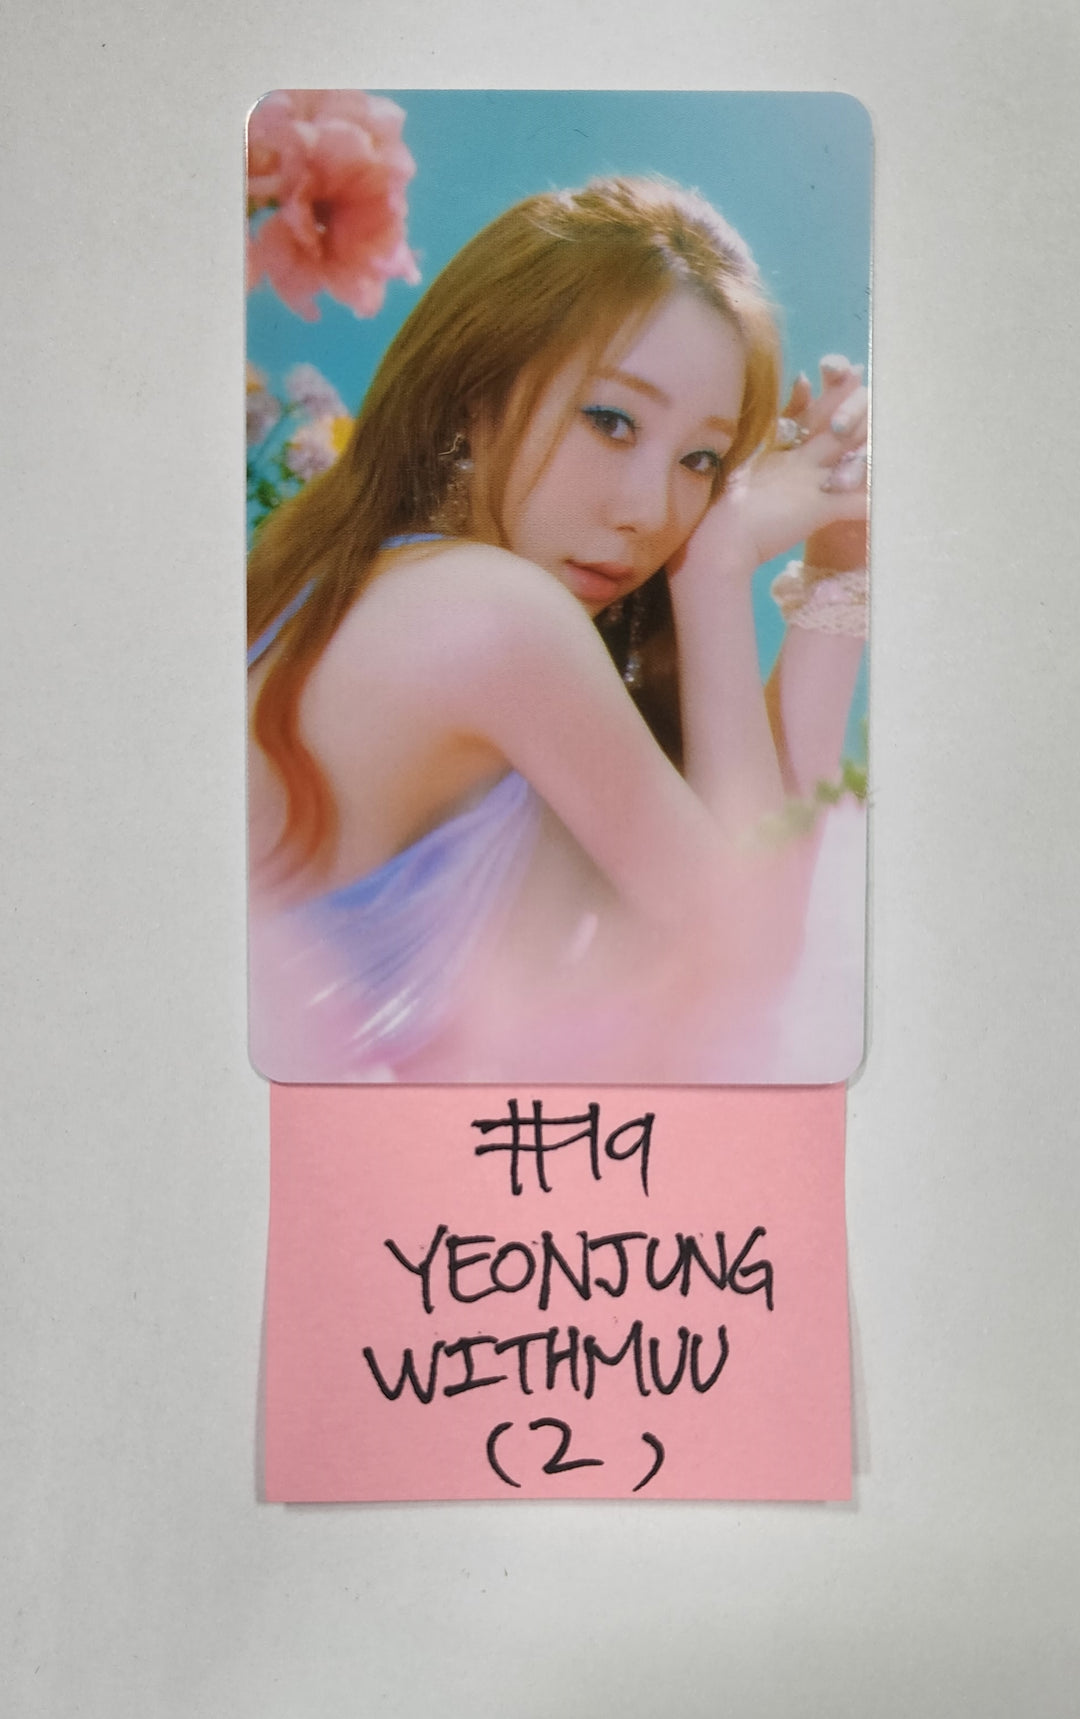 WJSN "Sequence" - Withmuu Lucky Draw Event PVC Photocard